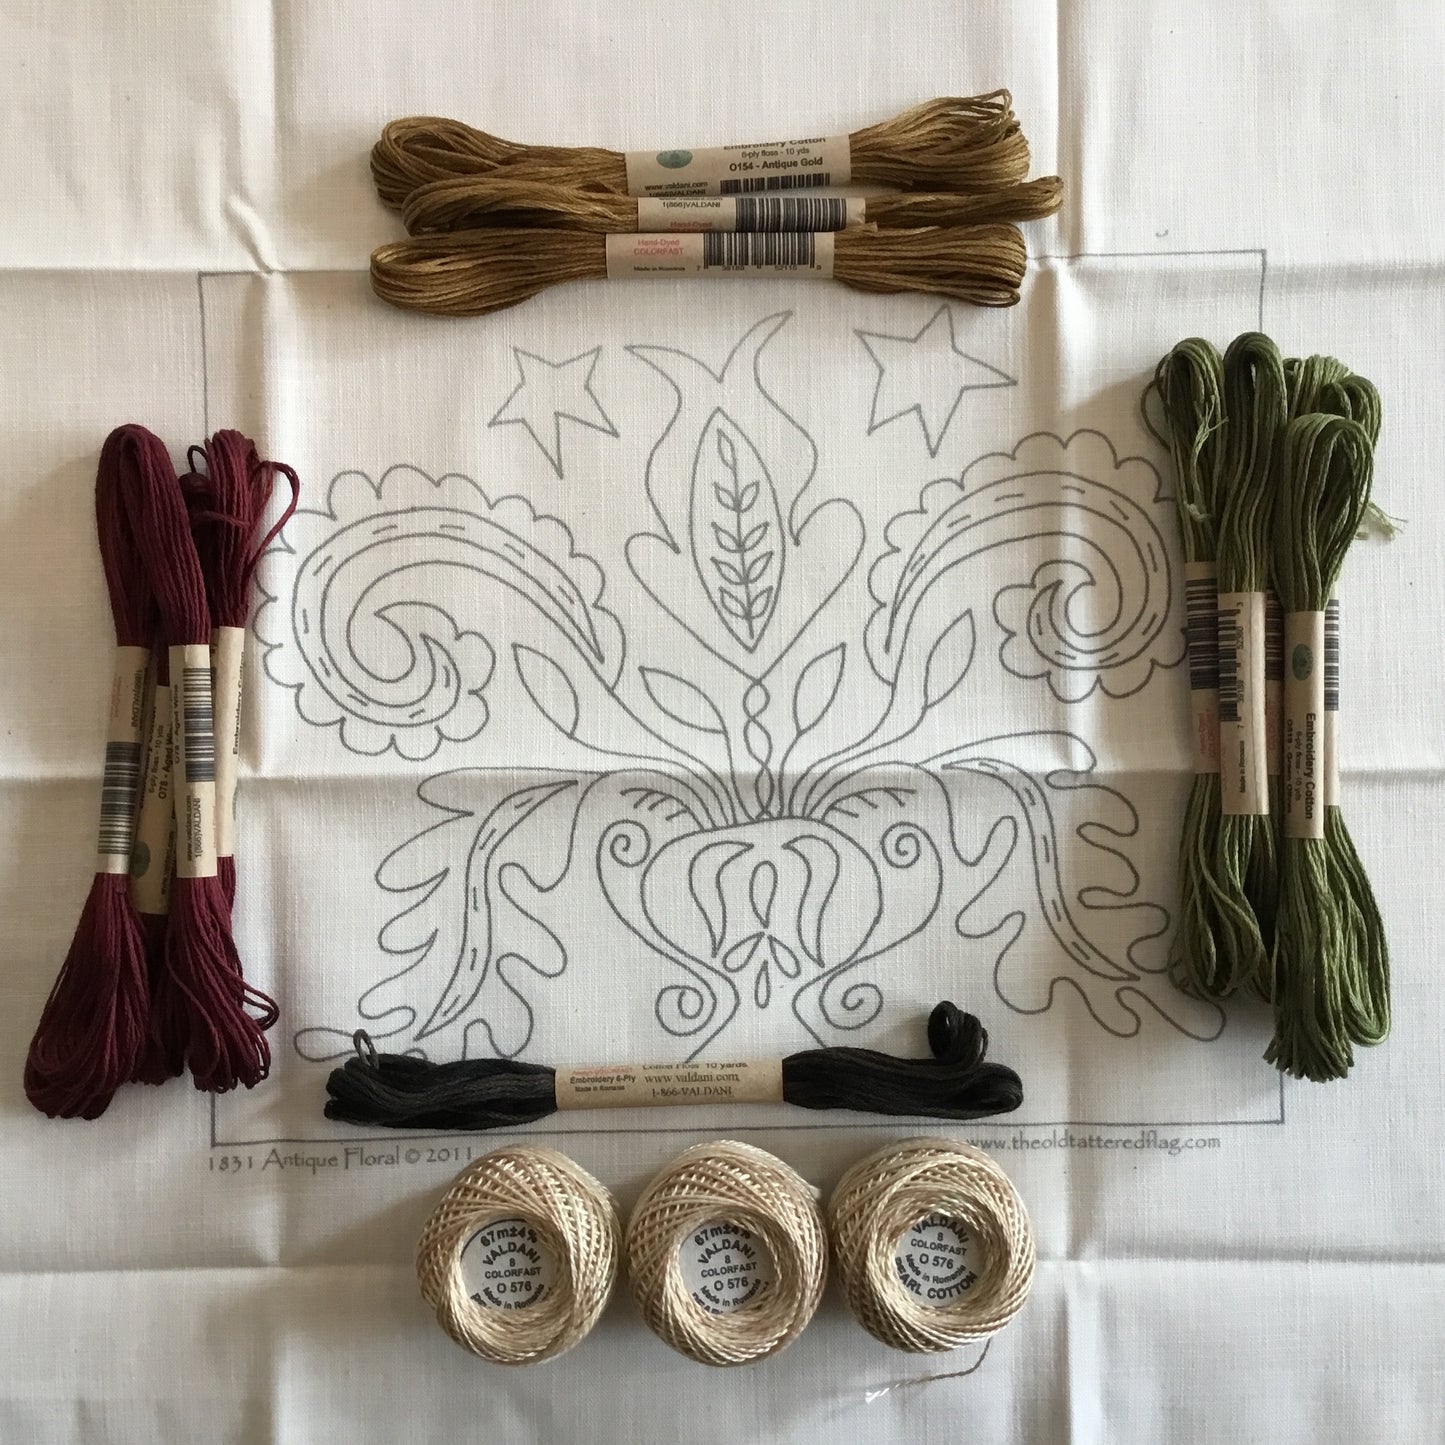 Punch Needle Embroidery - "1831 Antique Floral" Pattern